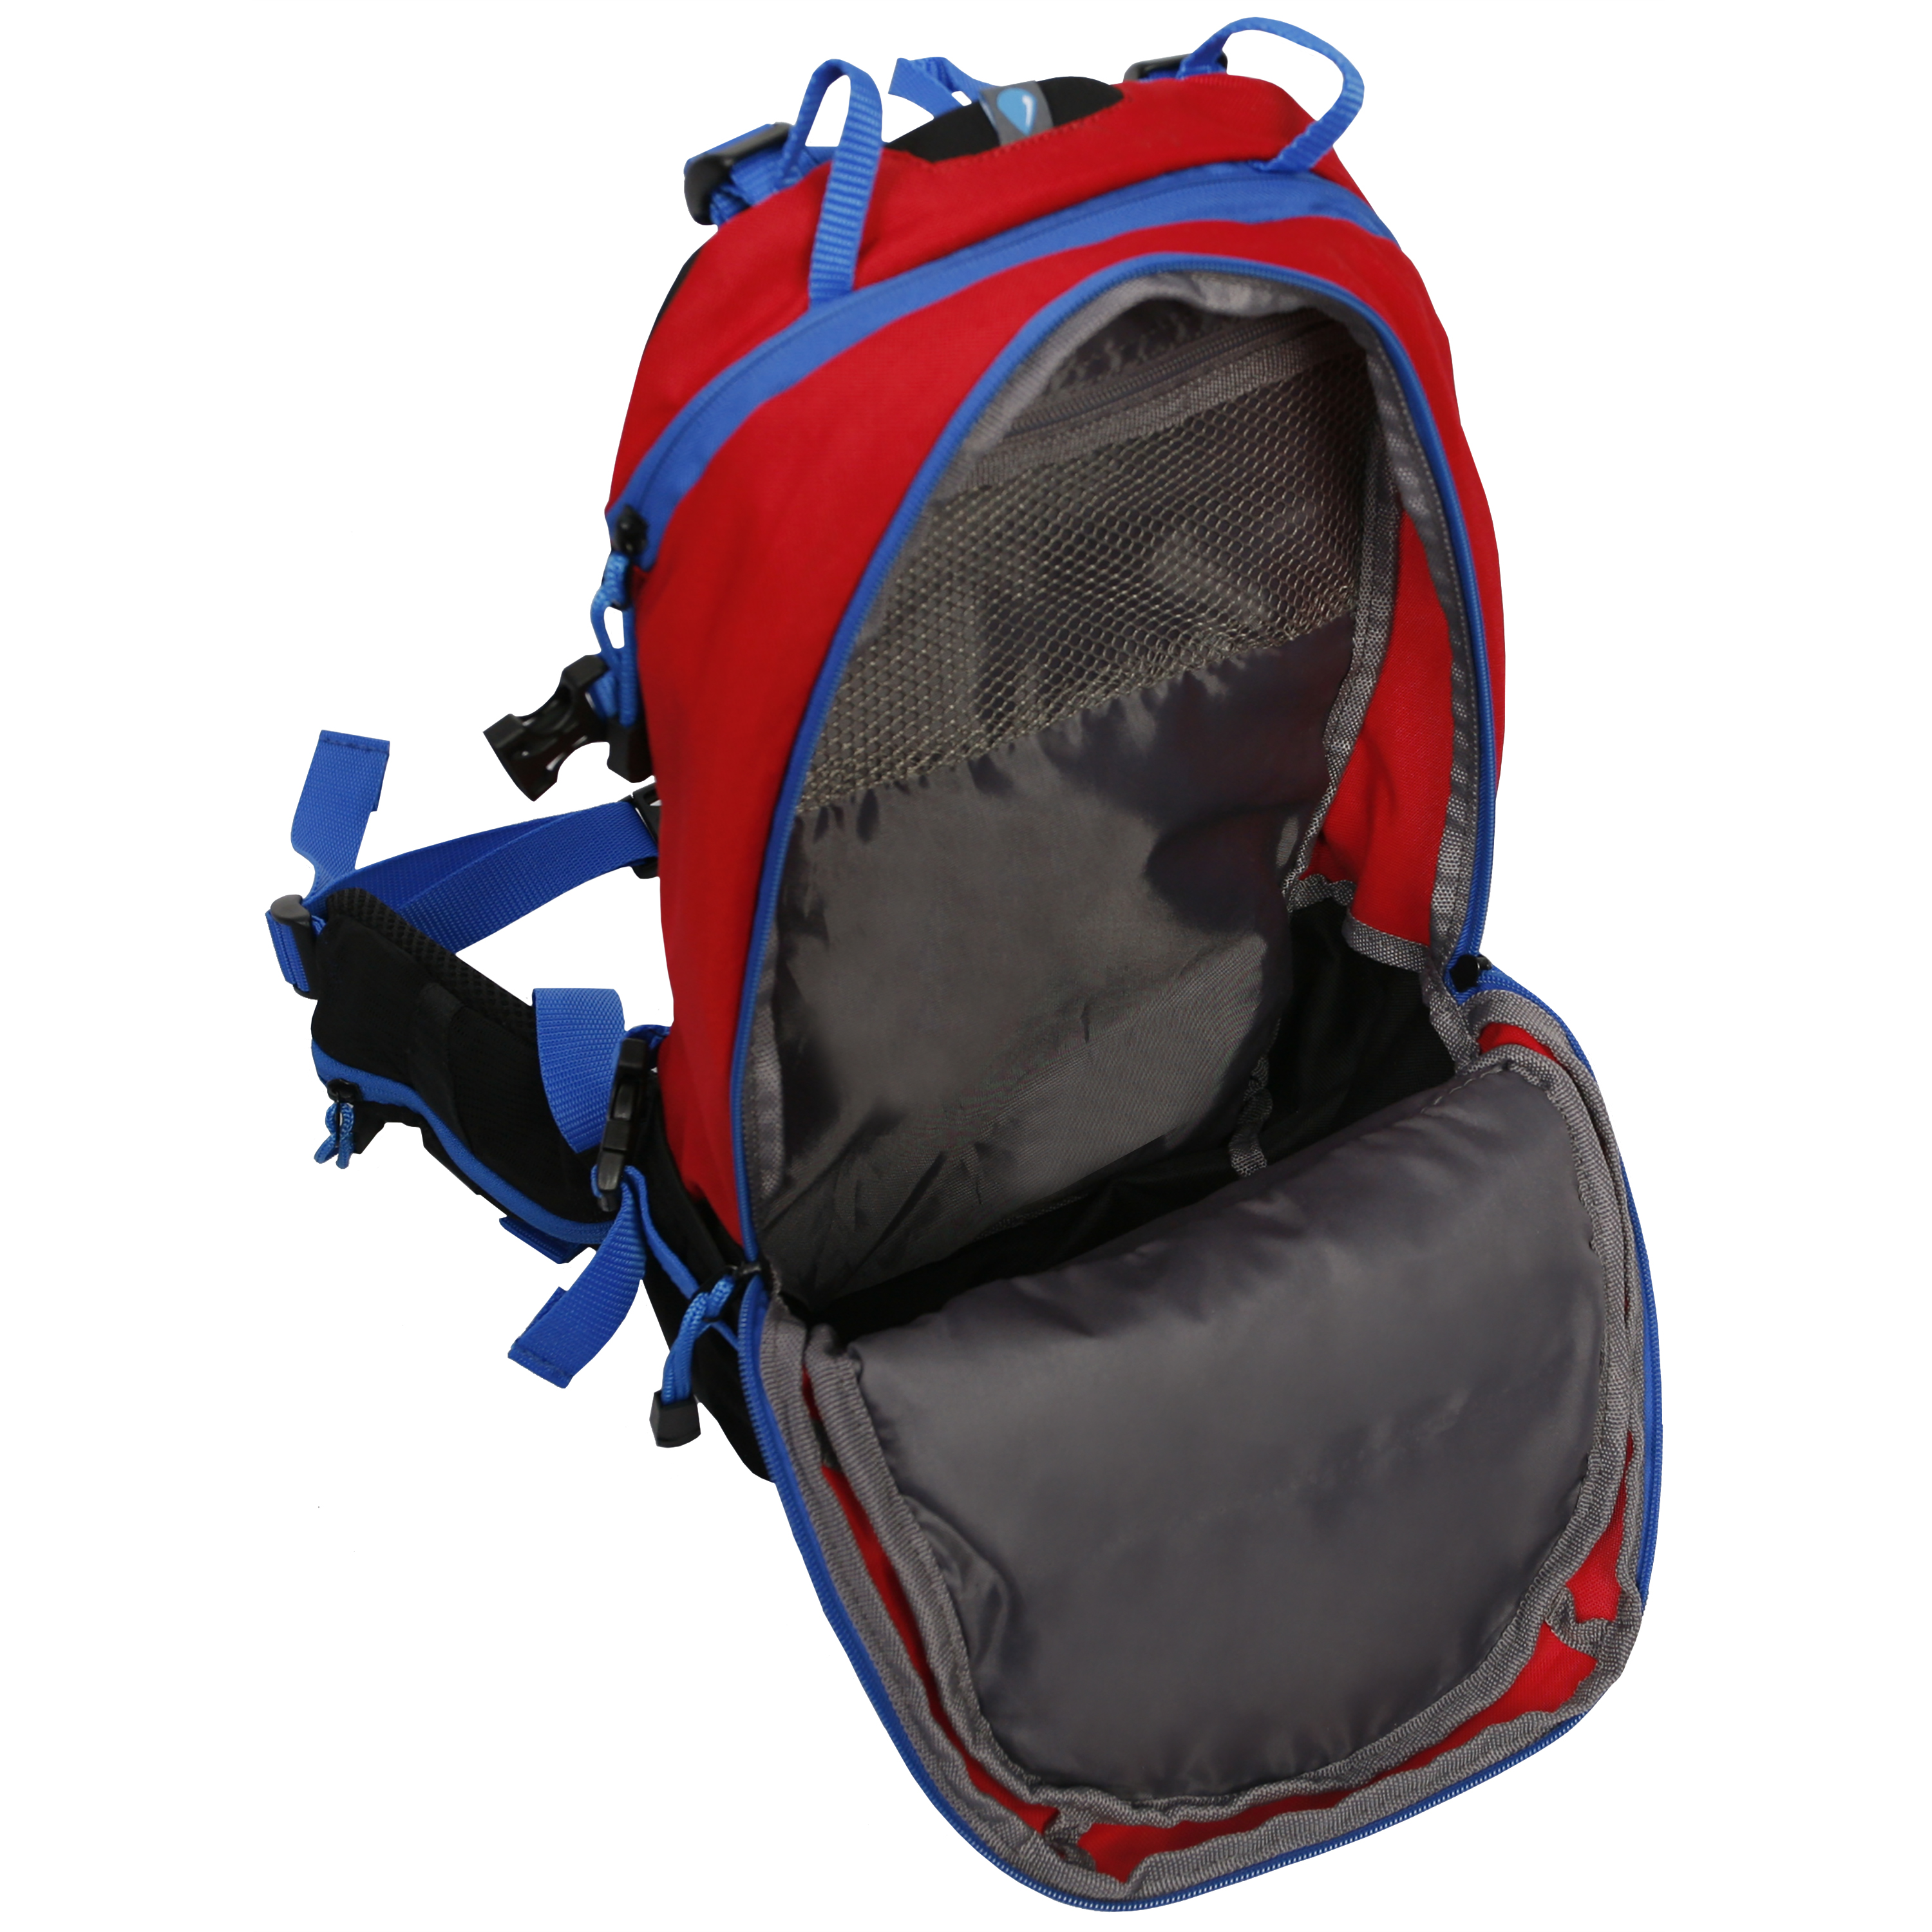 Ozark Trail 17-Liter Blanchard Springs Hydration Backpack with Hydration Reservoir, Red - image 2 of 4